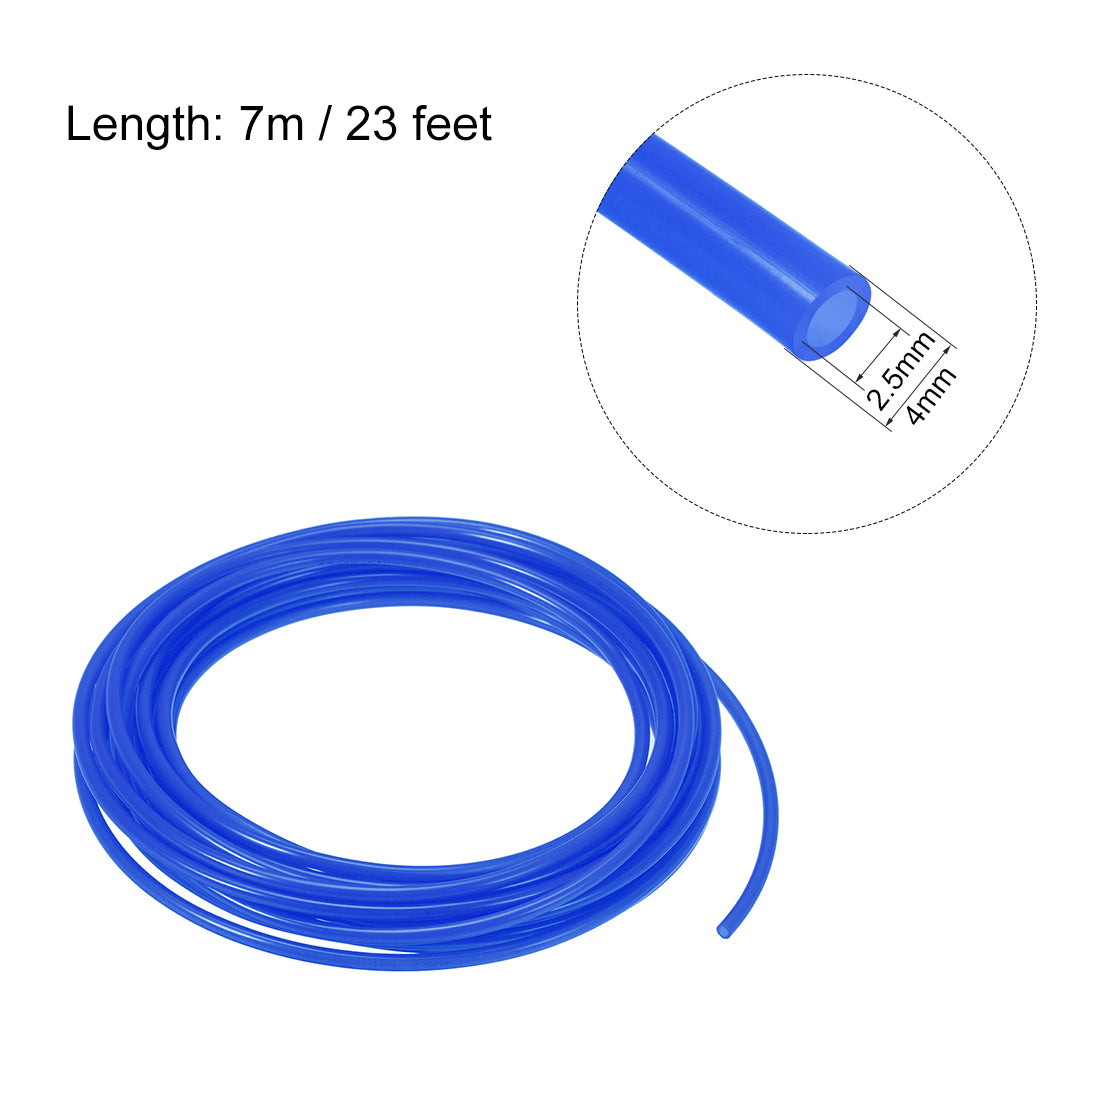 uxcell Uxcell 4mm OD 2.5mm ID 7m Long Blue PU Air Tubing Pipe Hose for Air Line Tube Fluid Transfer Pneumatic Tubing